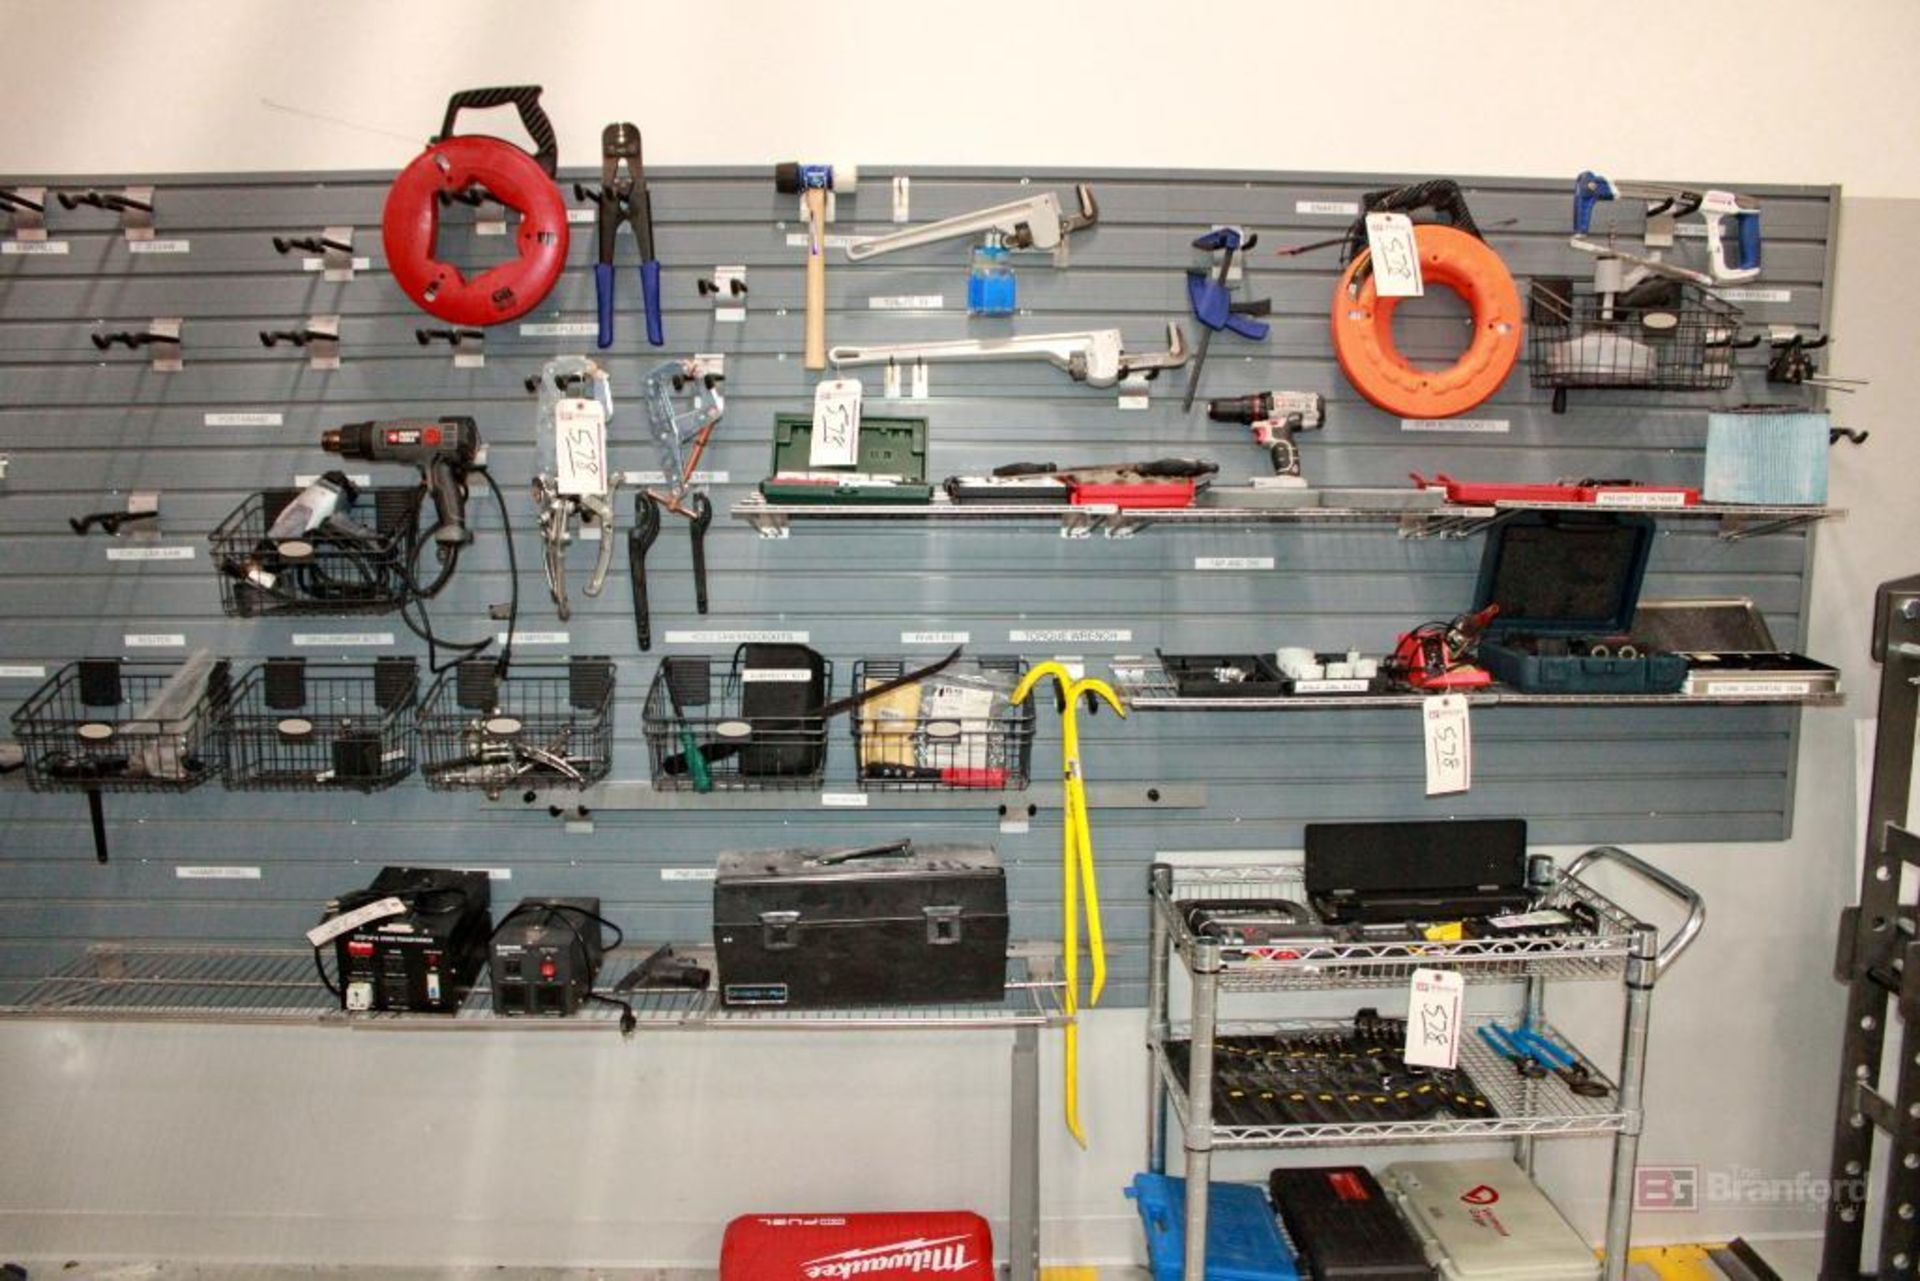 Contents of Tool Wall, with cart of tools